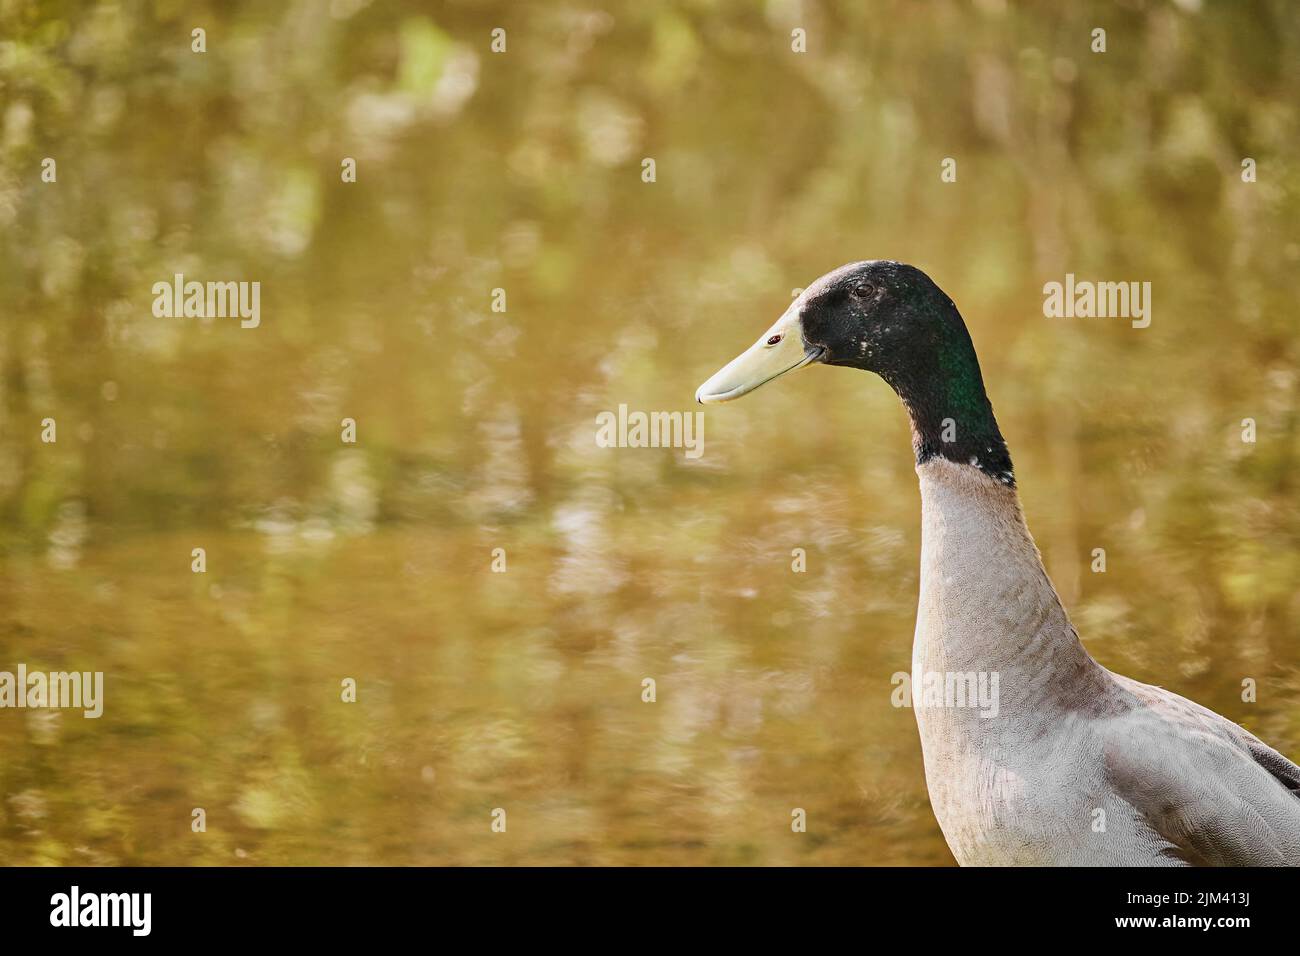 A closeup of the Indian runner duck, Anas platyrhynchos domesticus. Stock Photo